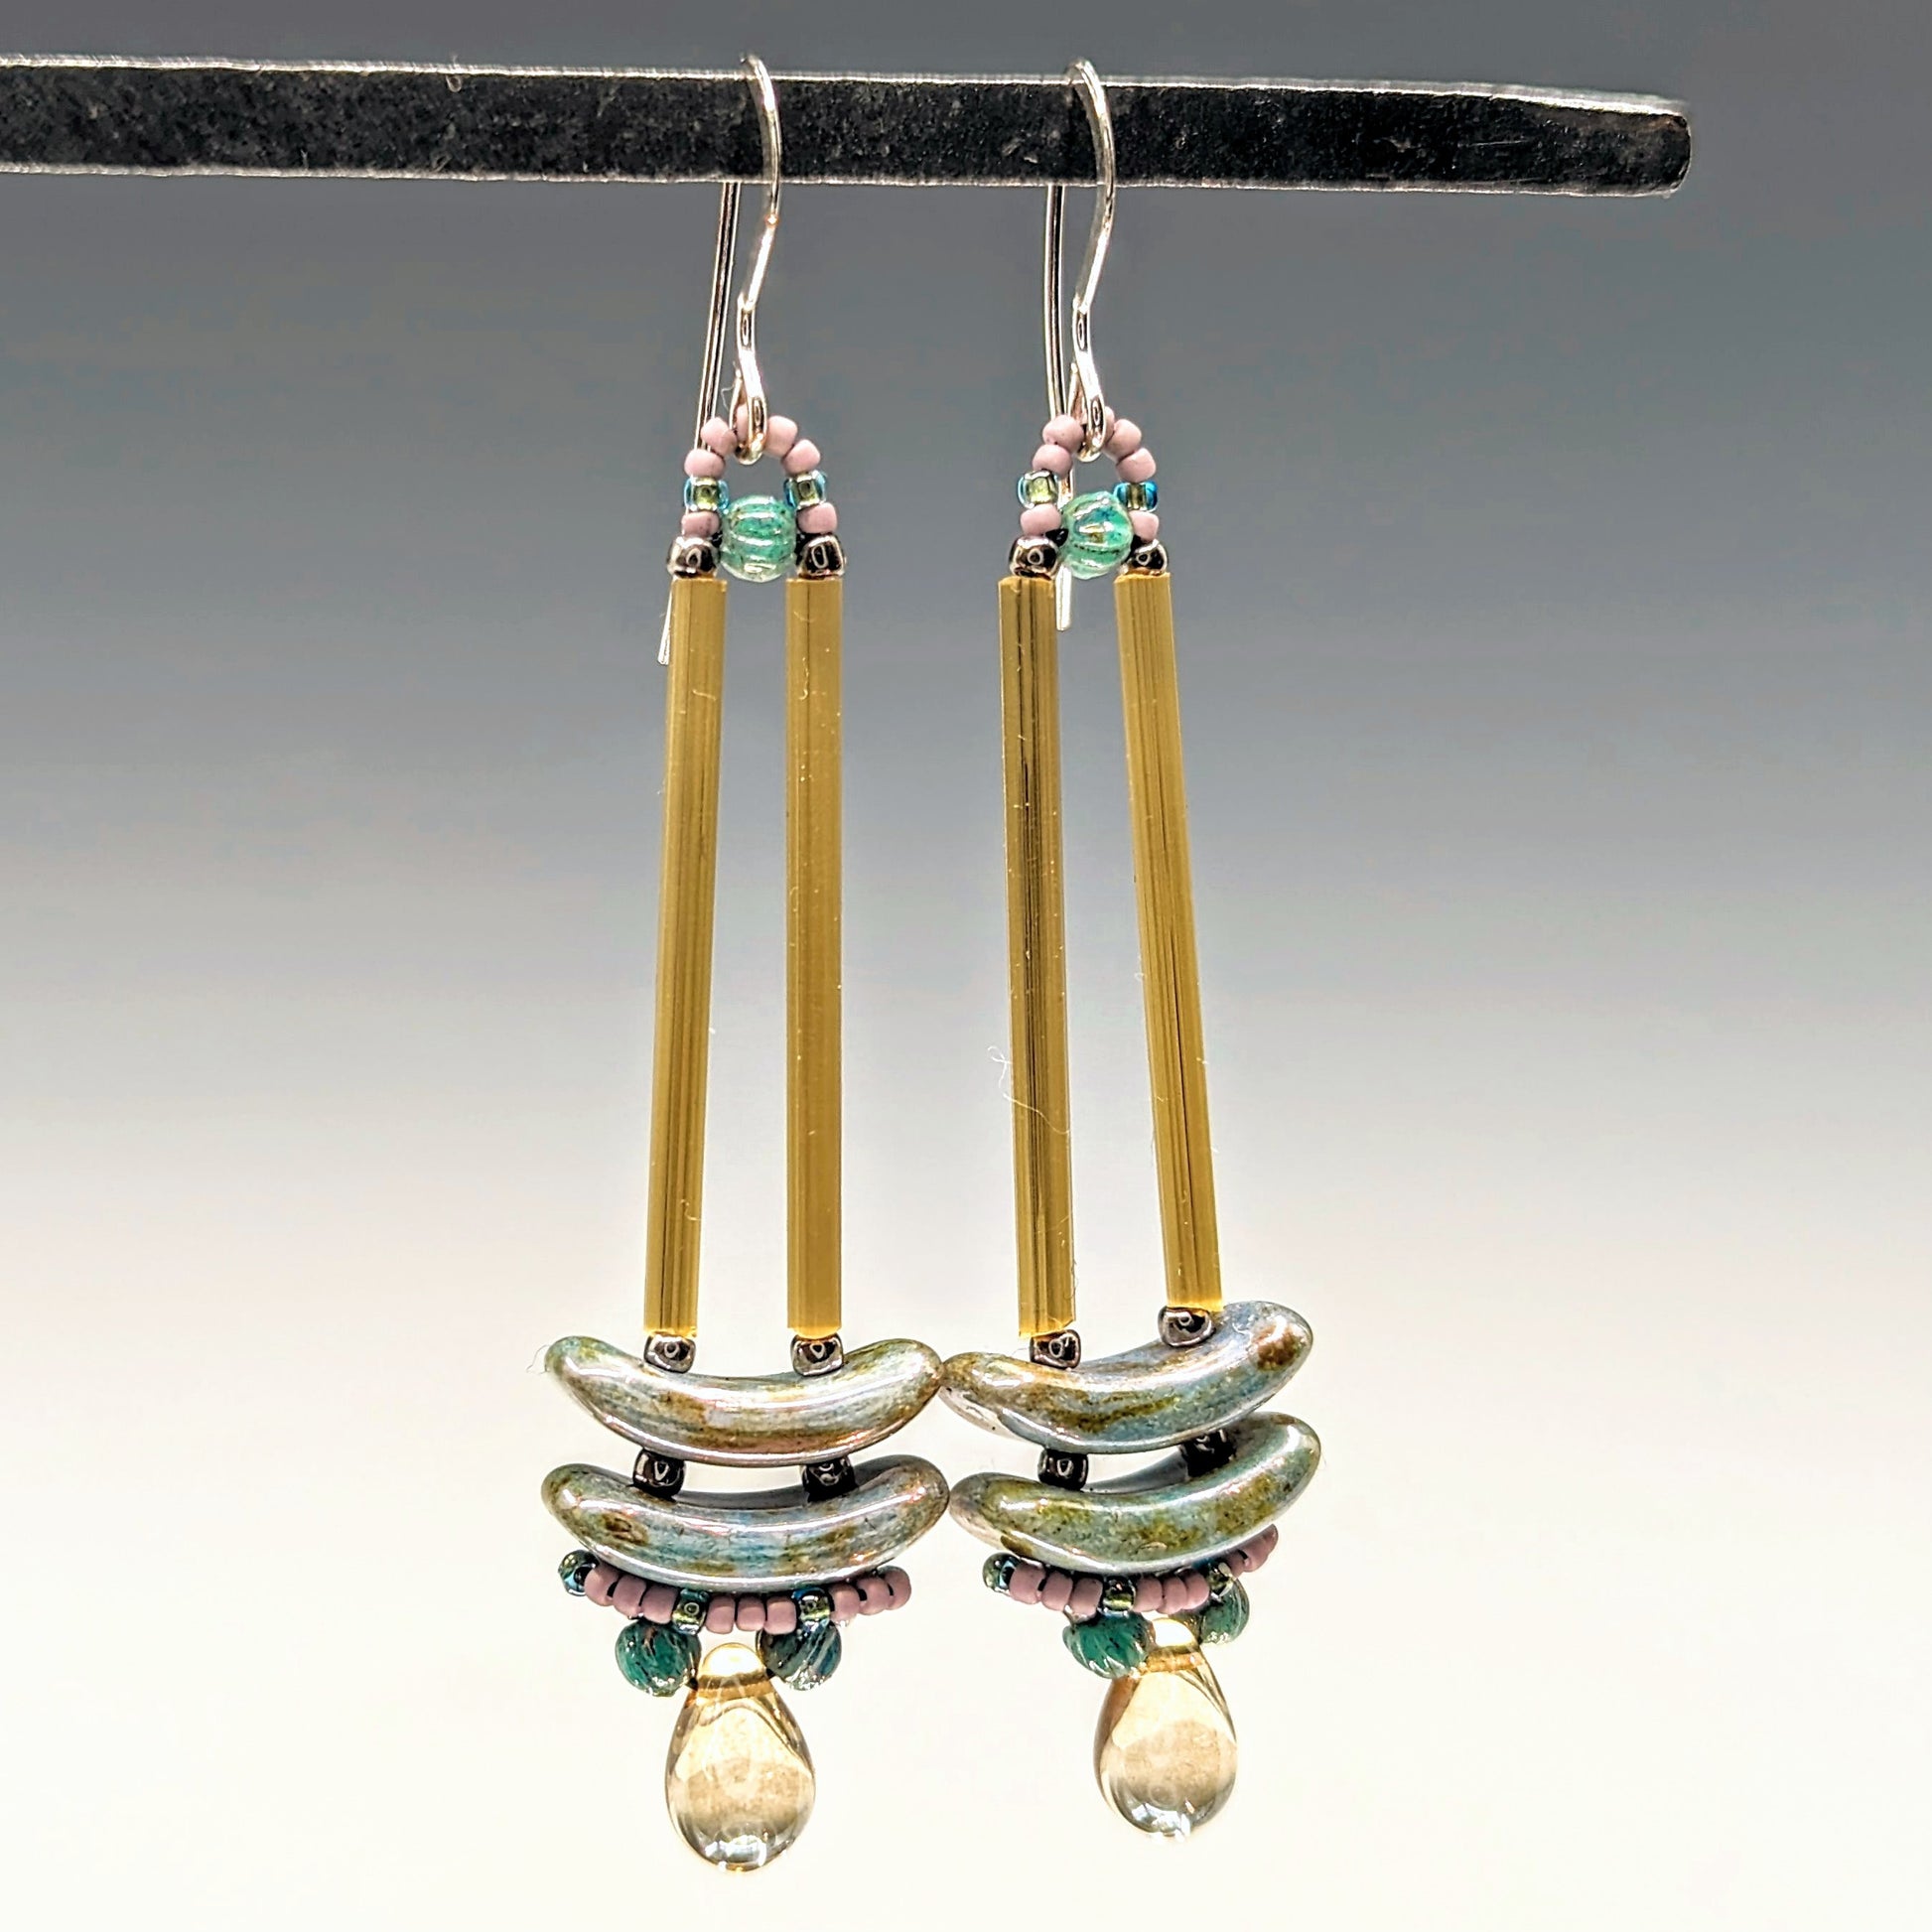 Earrings that look similar to a medicine dropper hang from a black bar. There are two long, yellow-gold beads forming narrow vertical columns ending at the top of two speckled gray-blue stacked arc shaped beads. At the bottom is a drop shaped bead made from clear champagne colored glass, surrounded by a belt of pale pink and dusty turquoise seed beads.